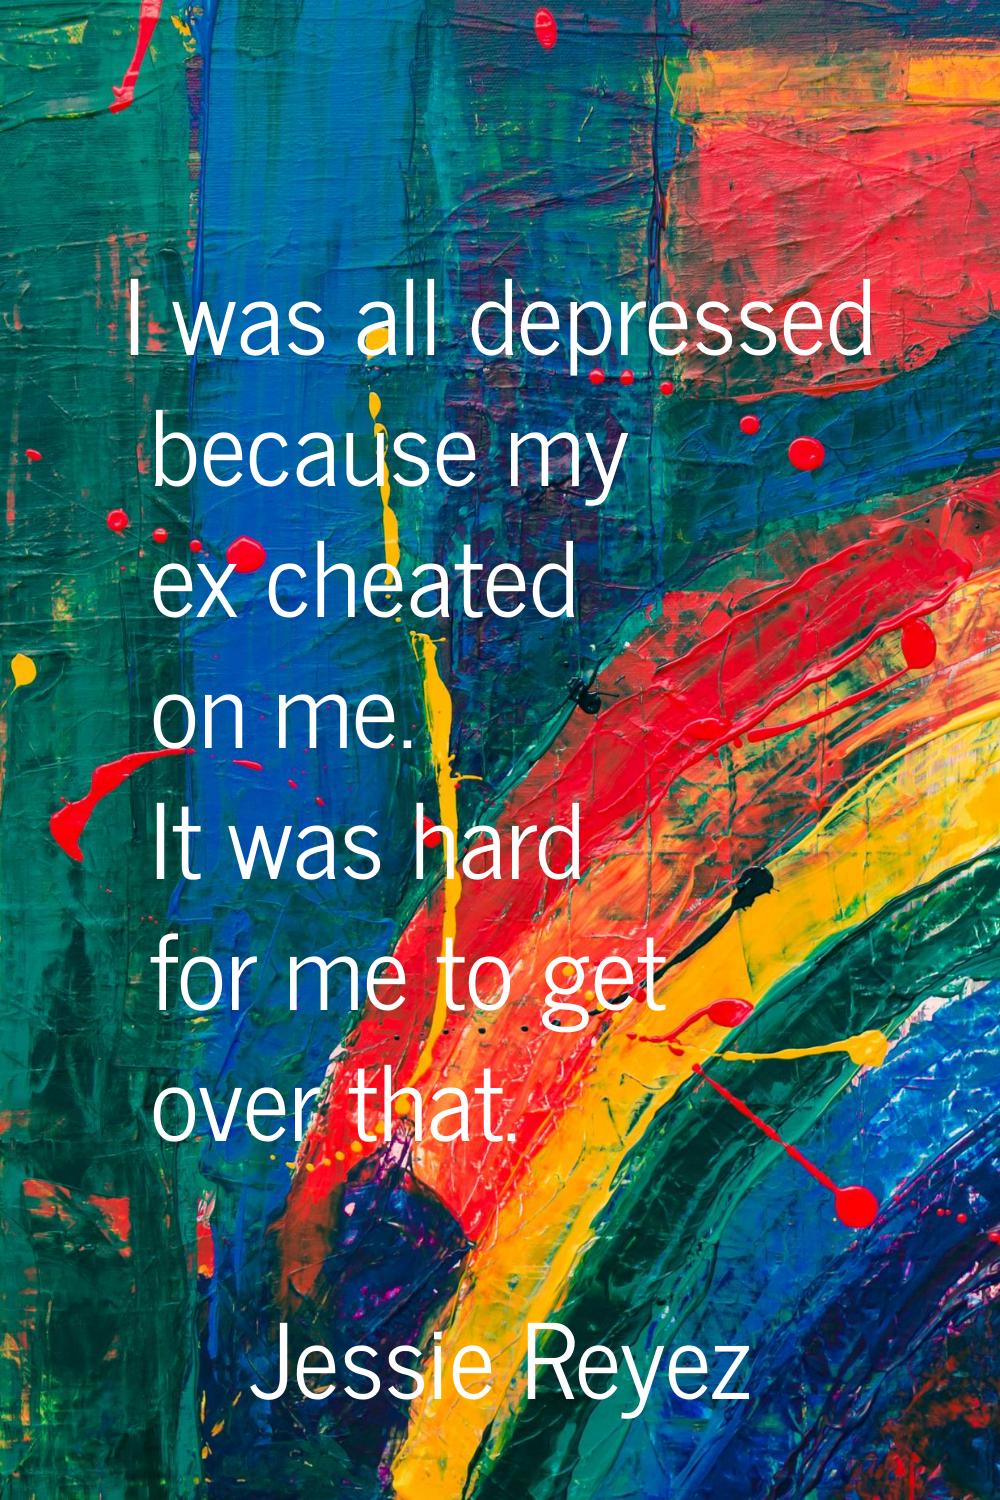 I was all depressed because my ex cheated on me. It was hard for me to get over that.